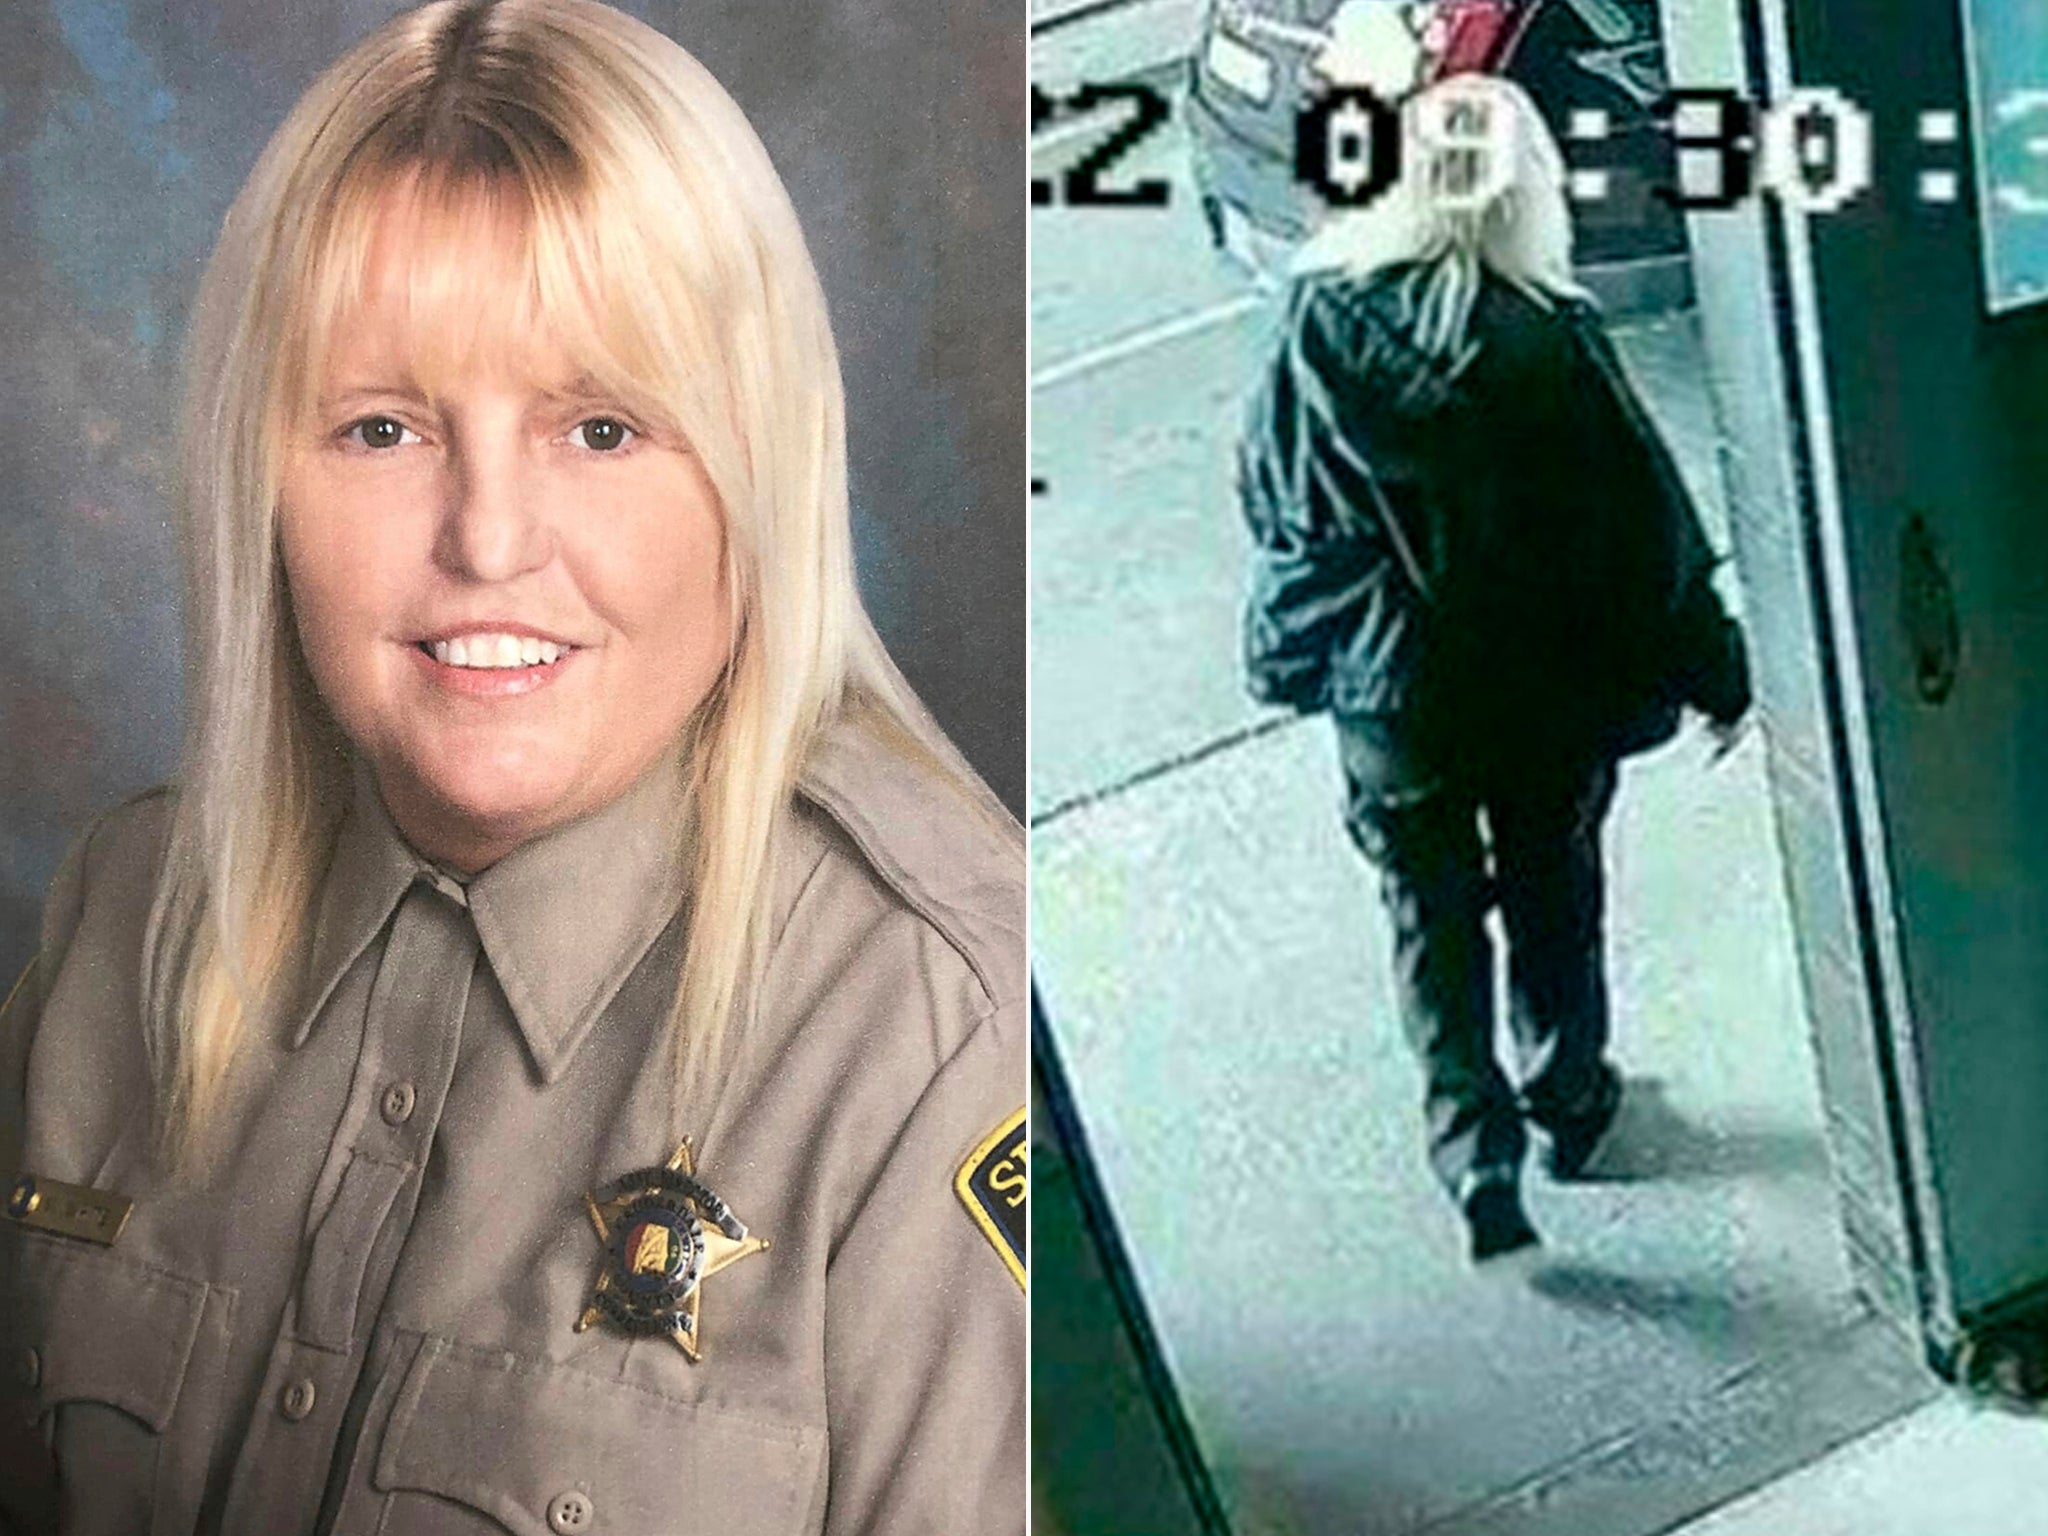 Vicky White pictured in her uniform (left) and on surveillance at the moment she helped her lover flee the jail (right)